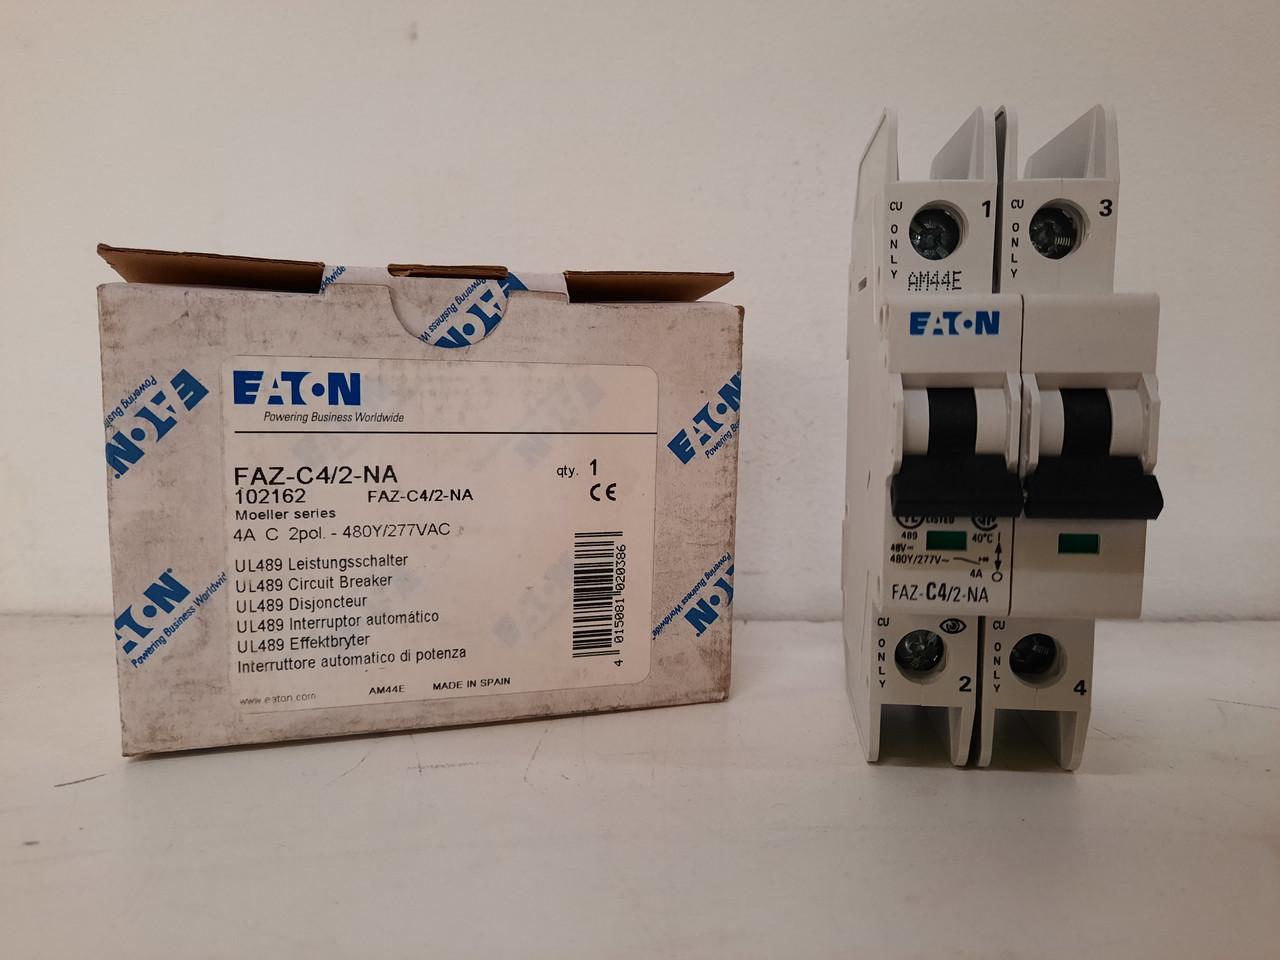 Eaton FAZ-C4/2-NA 277/480 VAC, 96 VDC, 4 A, 10 kA, 5 to 10 x Rated Current, 2-Pole, Screw Terminal, DIN Rail Mount, Current Limiting, Thermal Magnetic